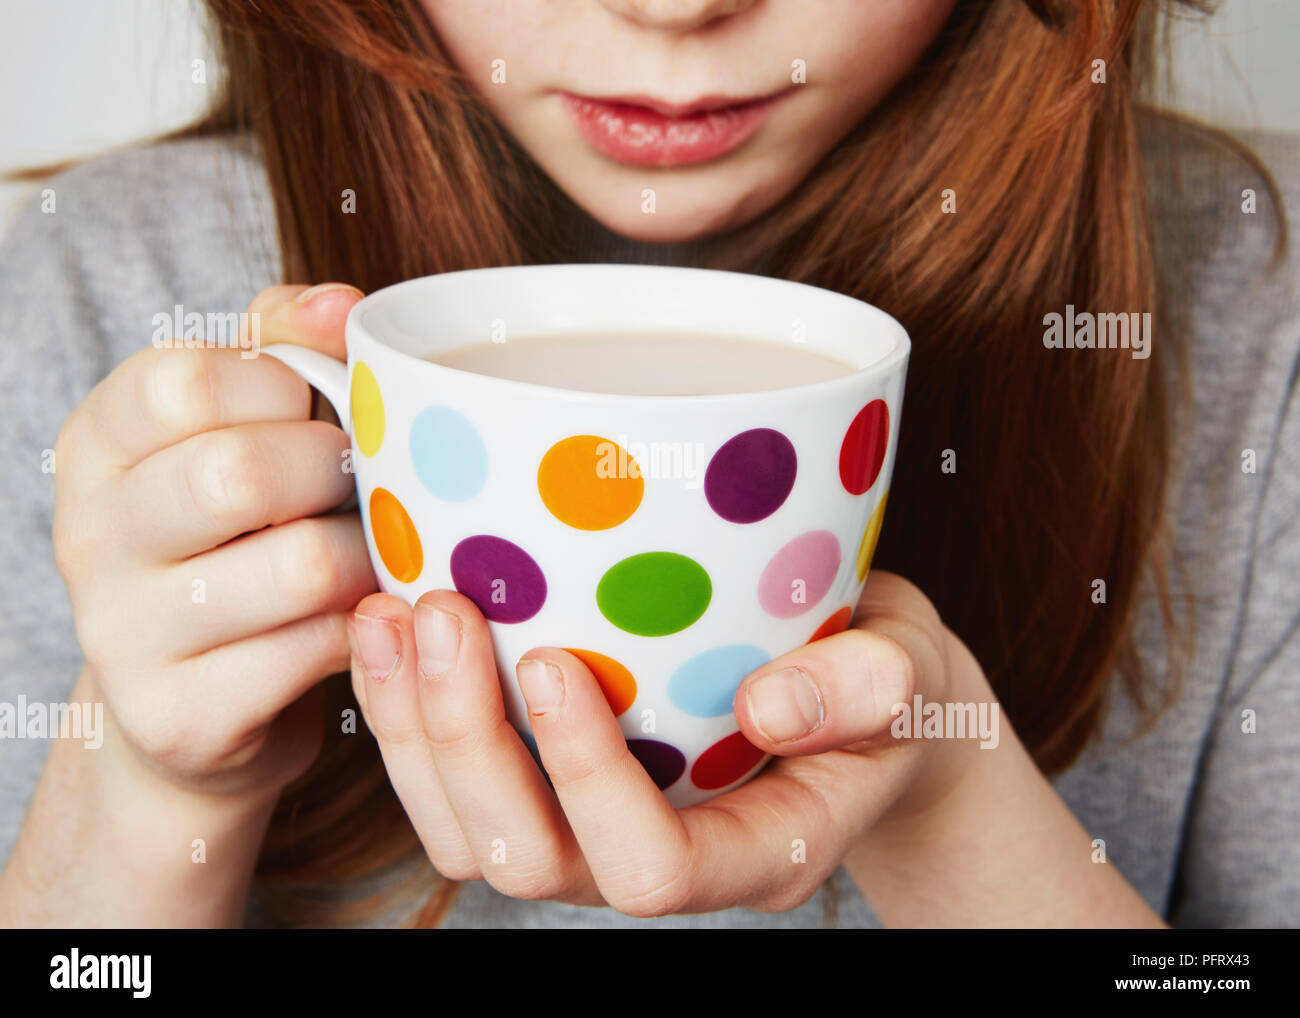 Child drinking a hot drink from a spotty mug Stock Photo